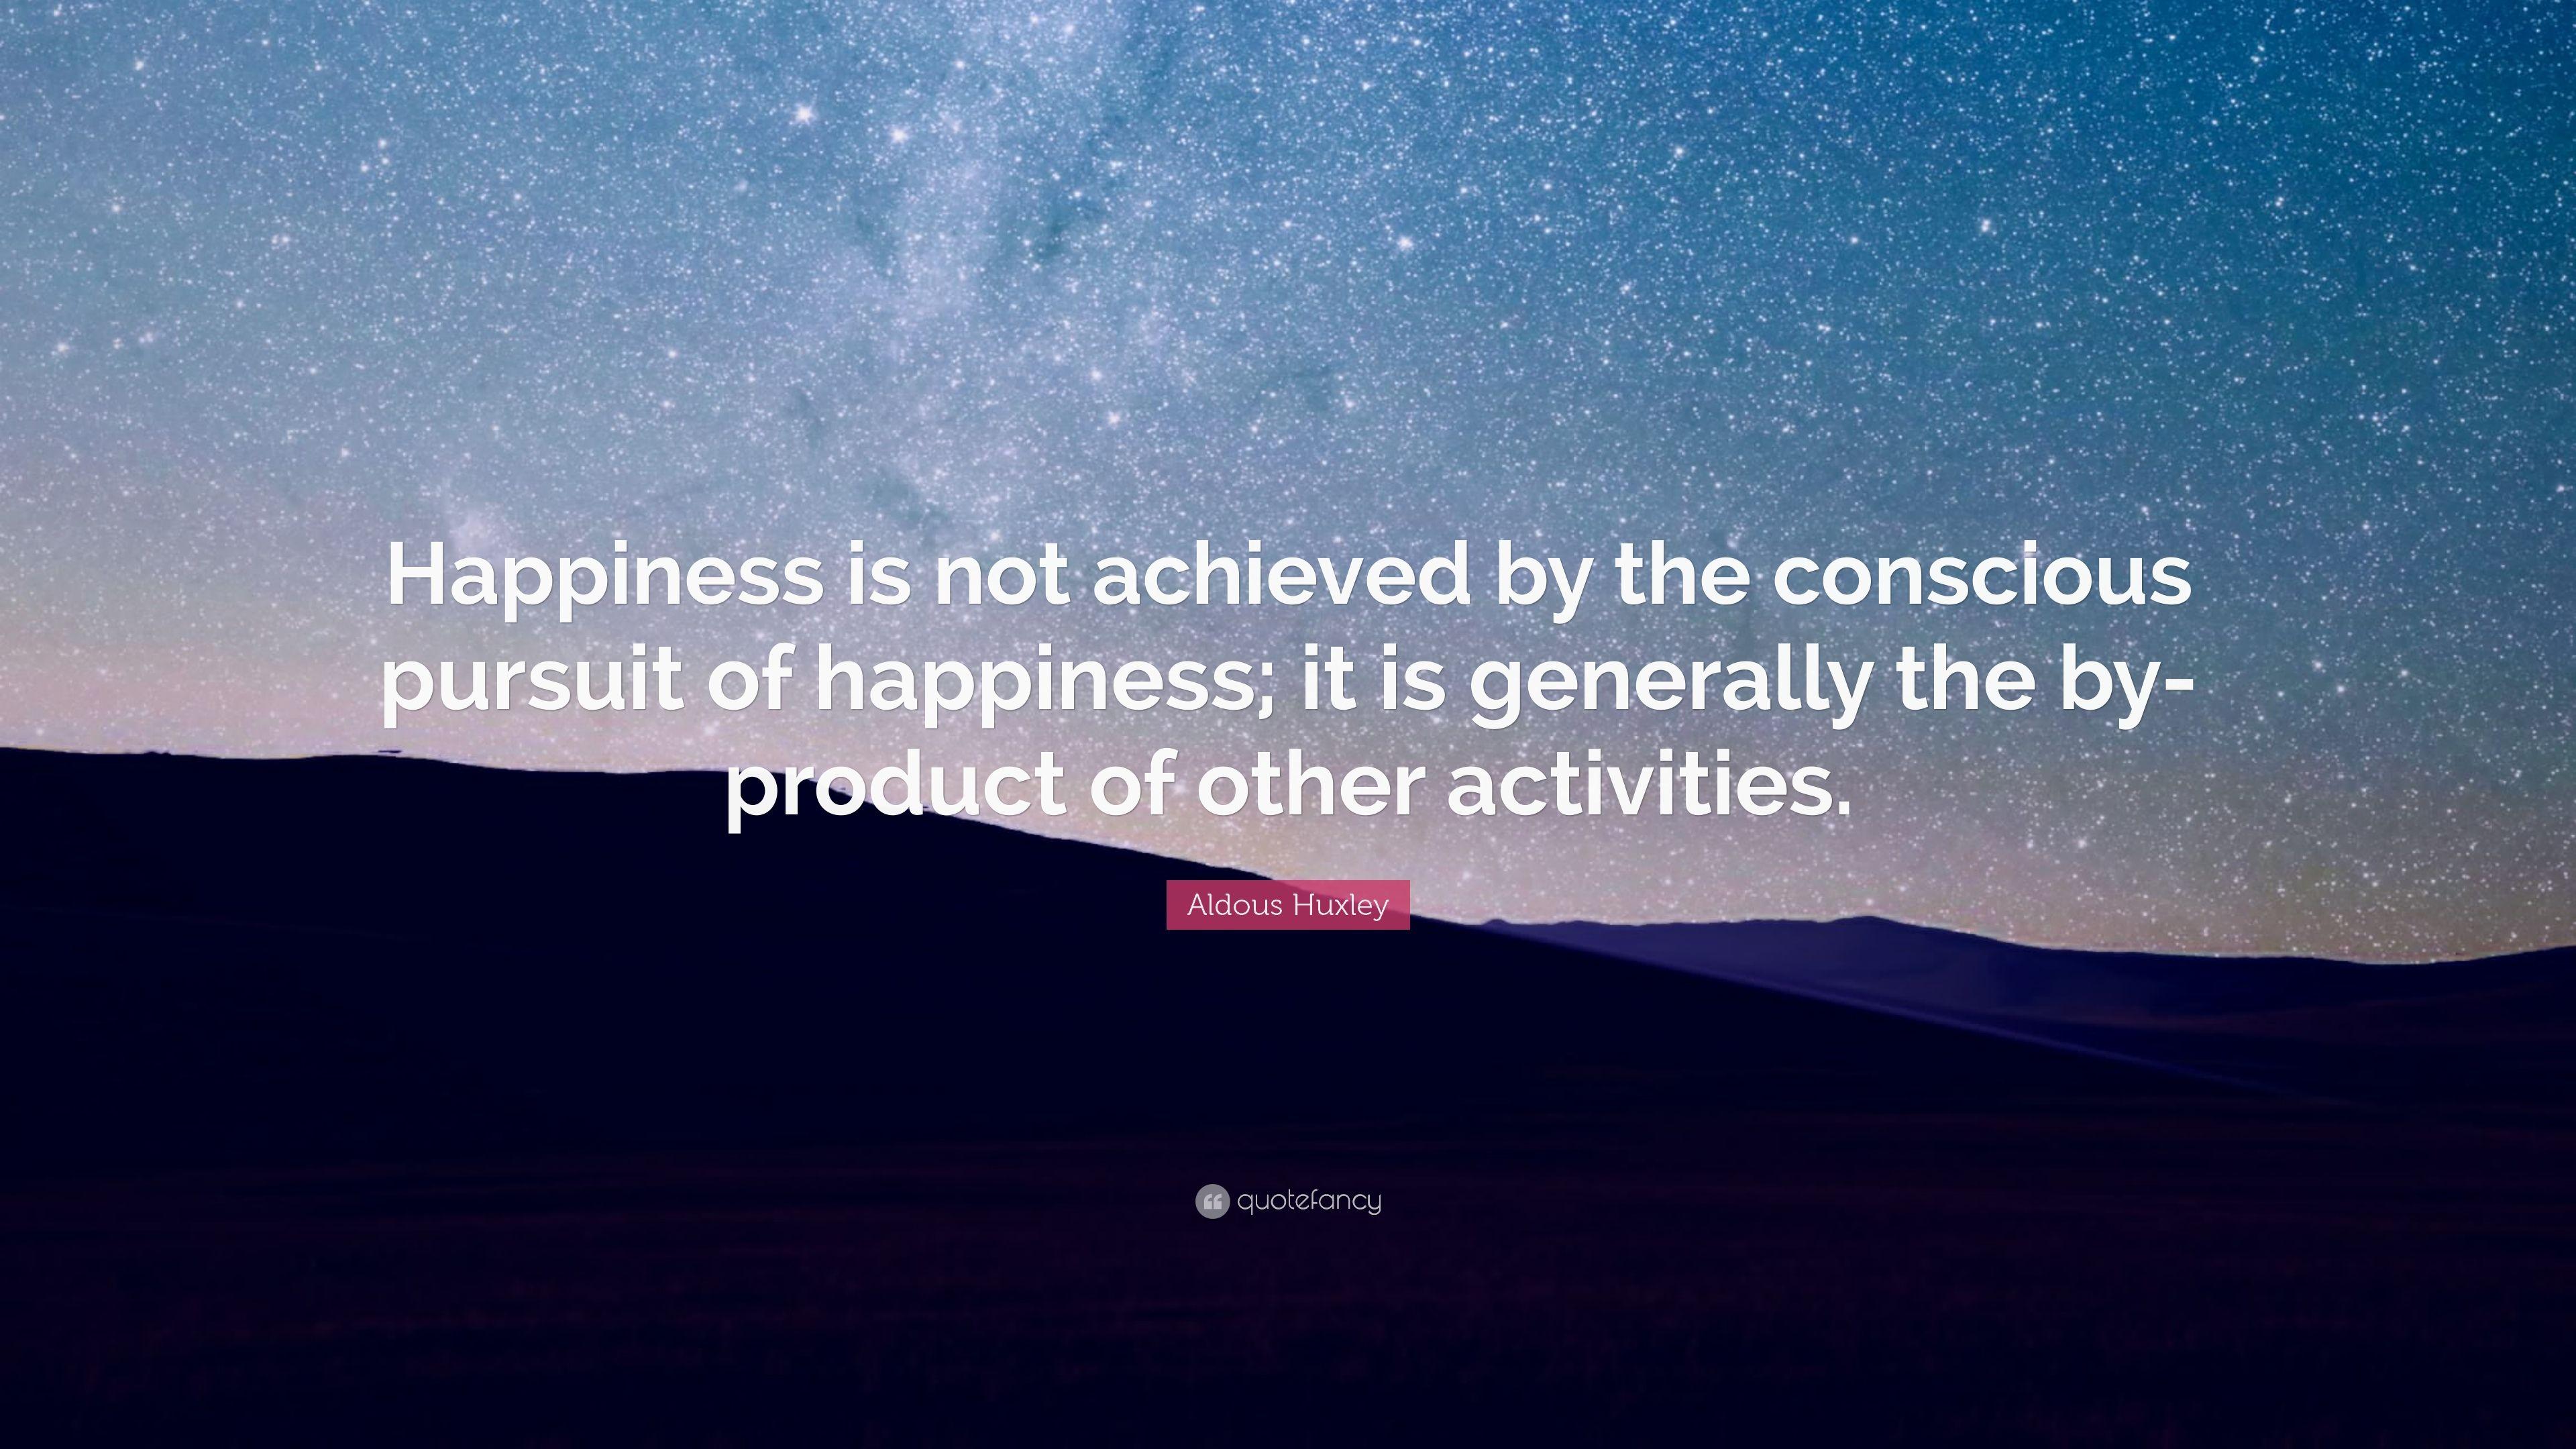 The Pursuit Of Happiness Quote Wallpapers HD - Wallpaper Cave